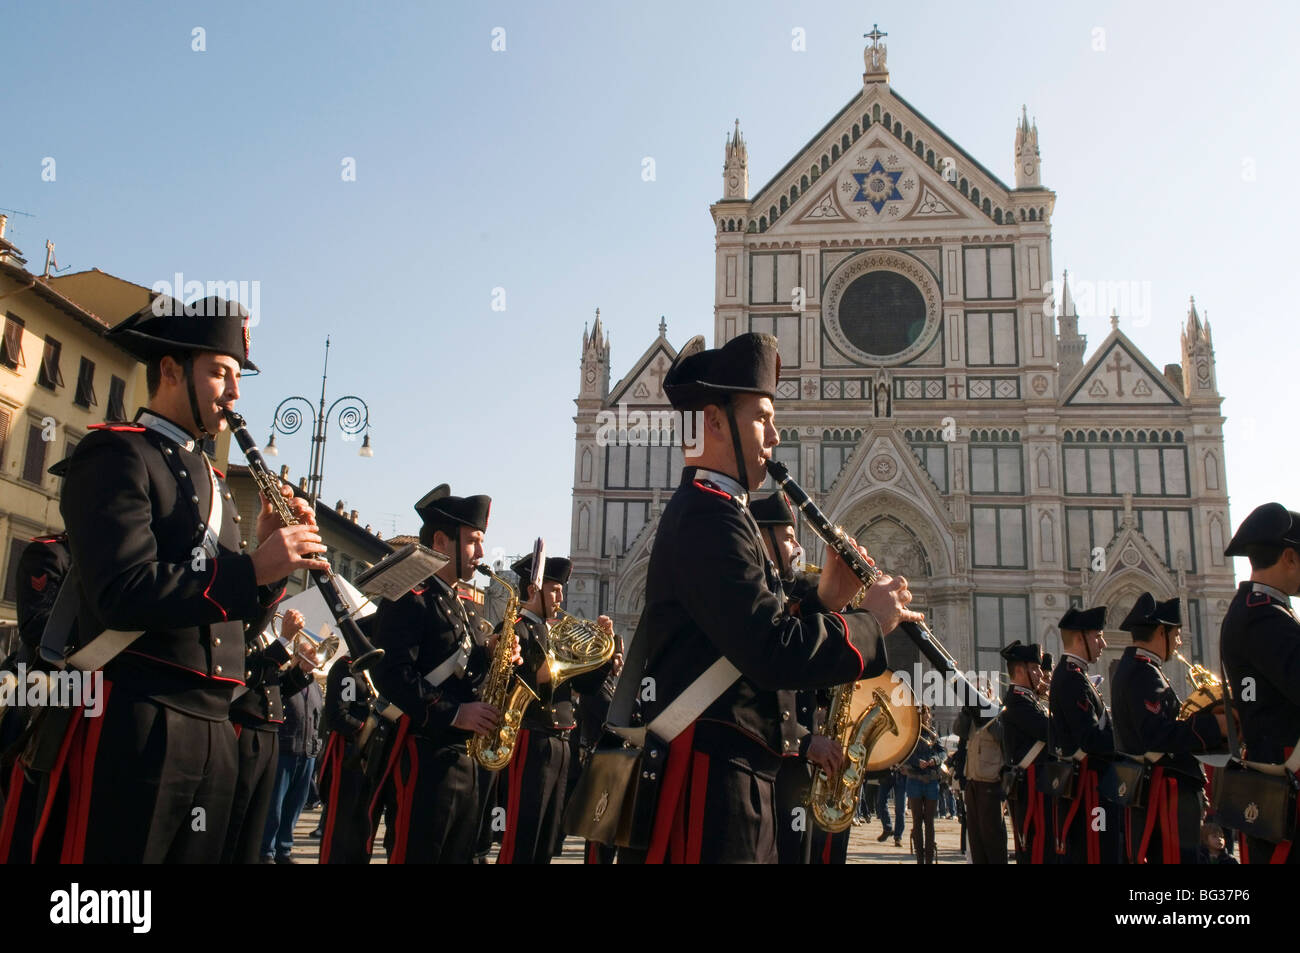 Carabinieri's band in Santa Croce Square, Florence (Firenze), Tuscany, Italy, Europe Stock Photo